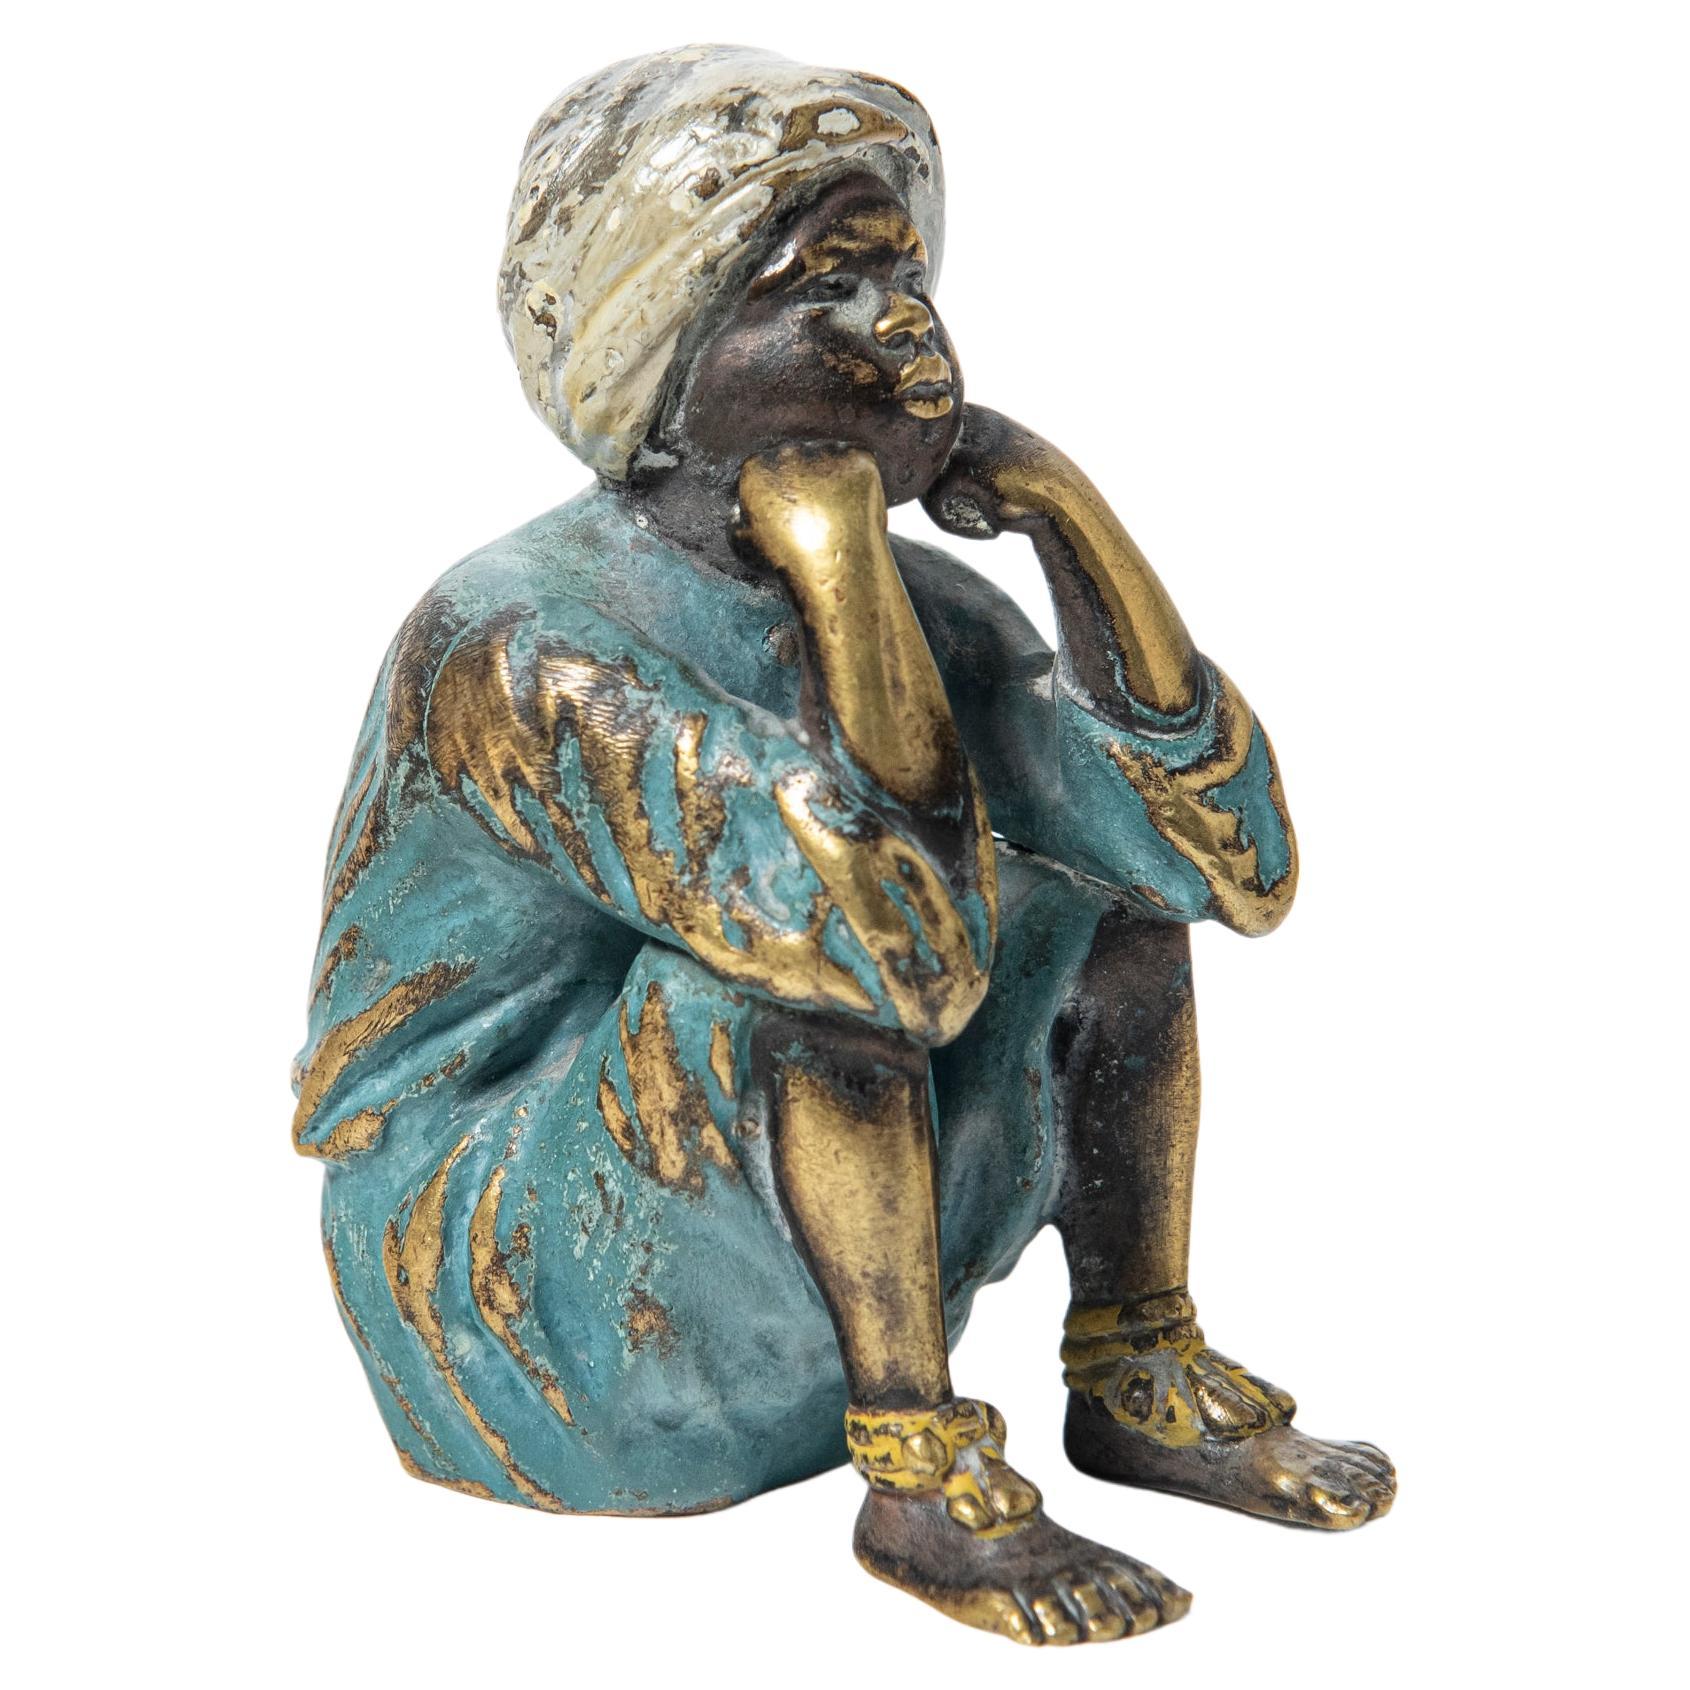 Cold-painted bronze sculpture by Franz Bergmann. Austria, early 20th century.